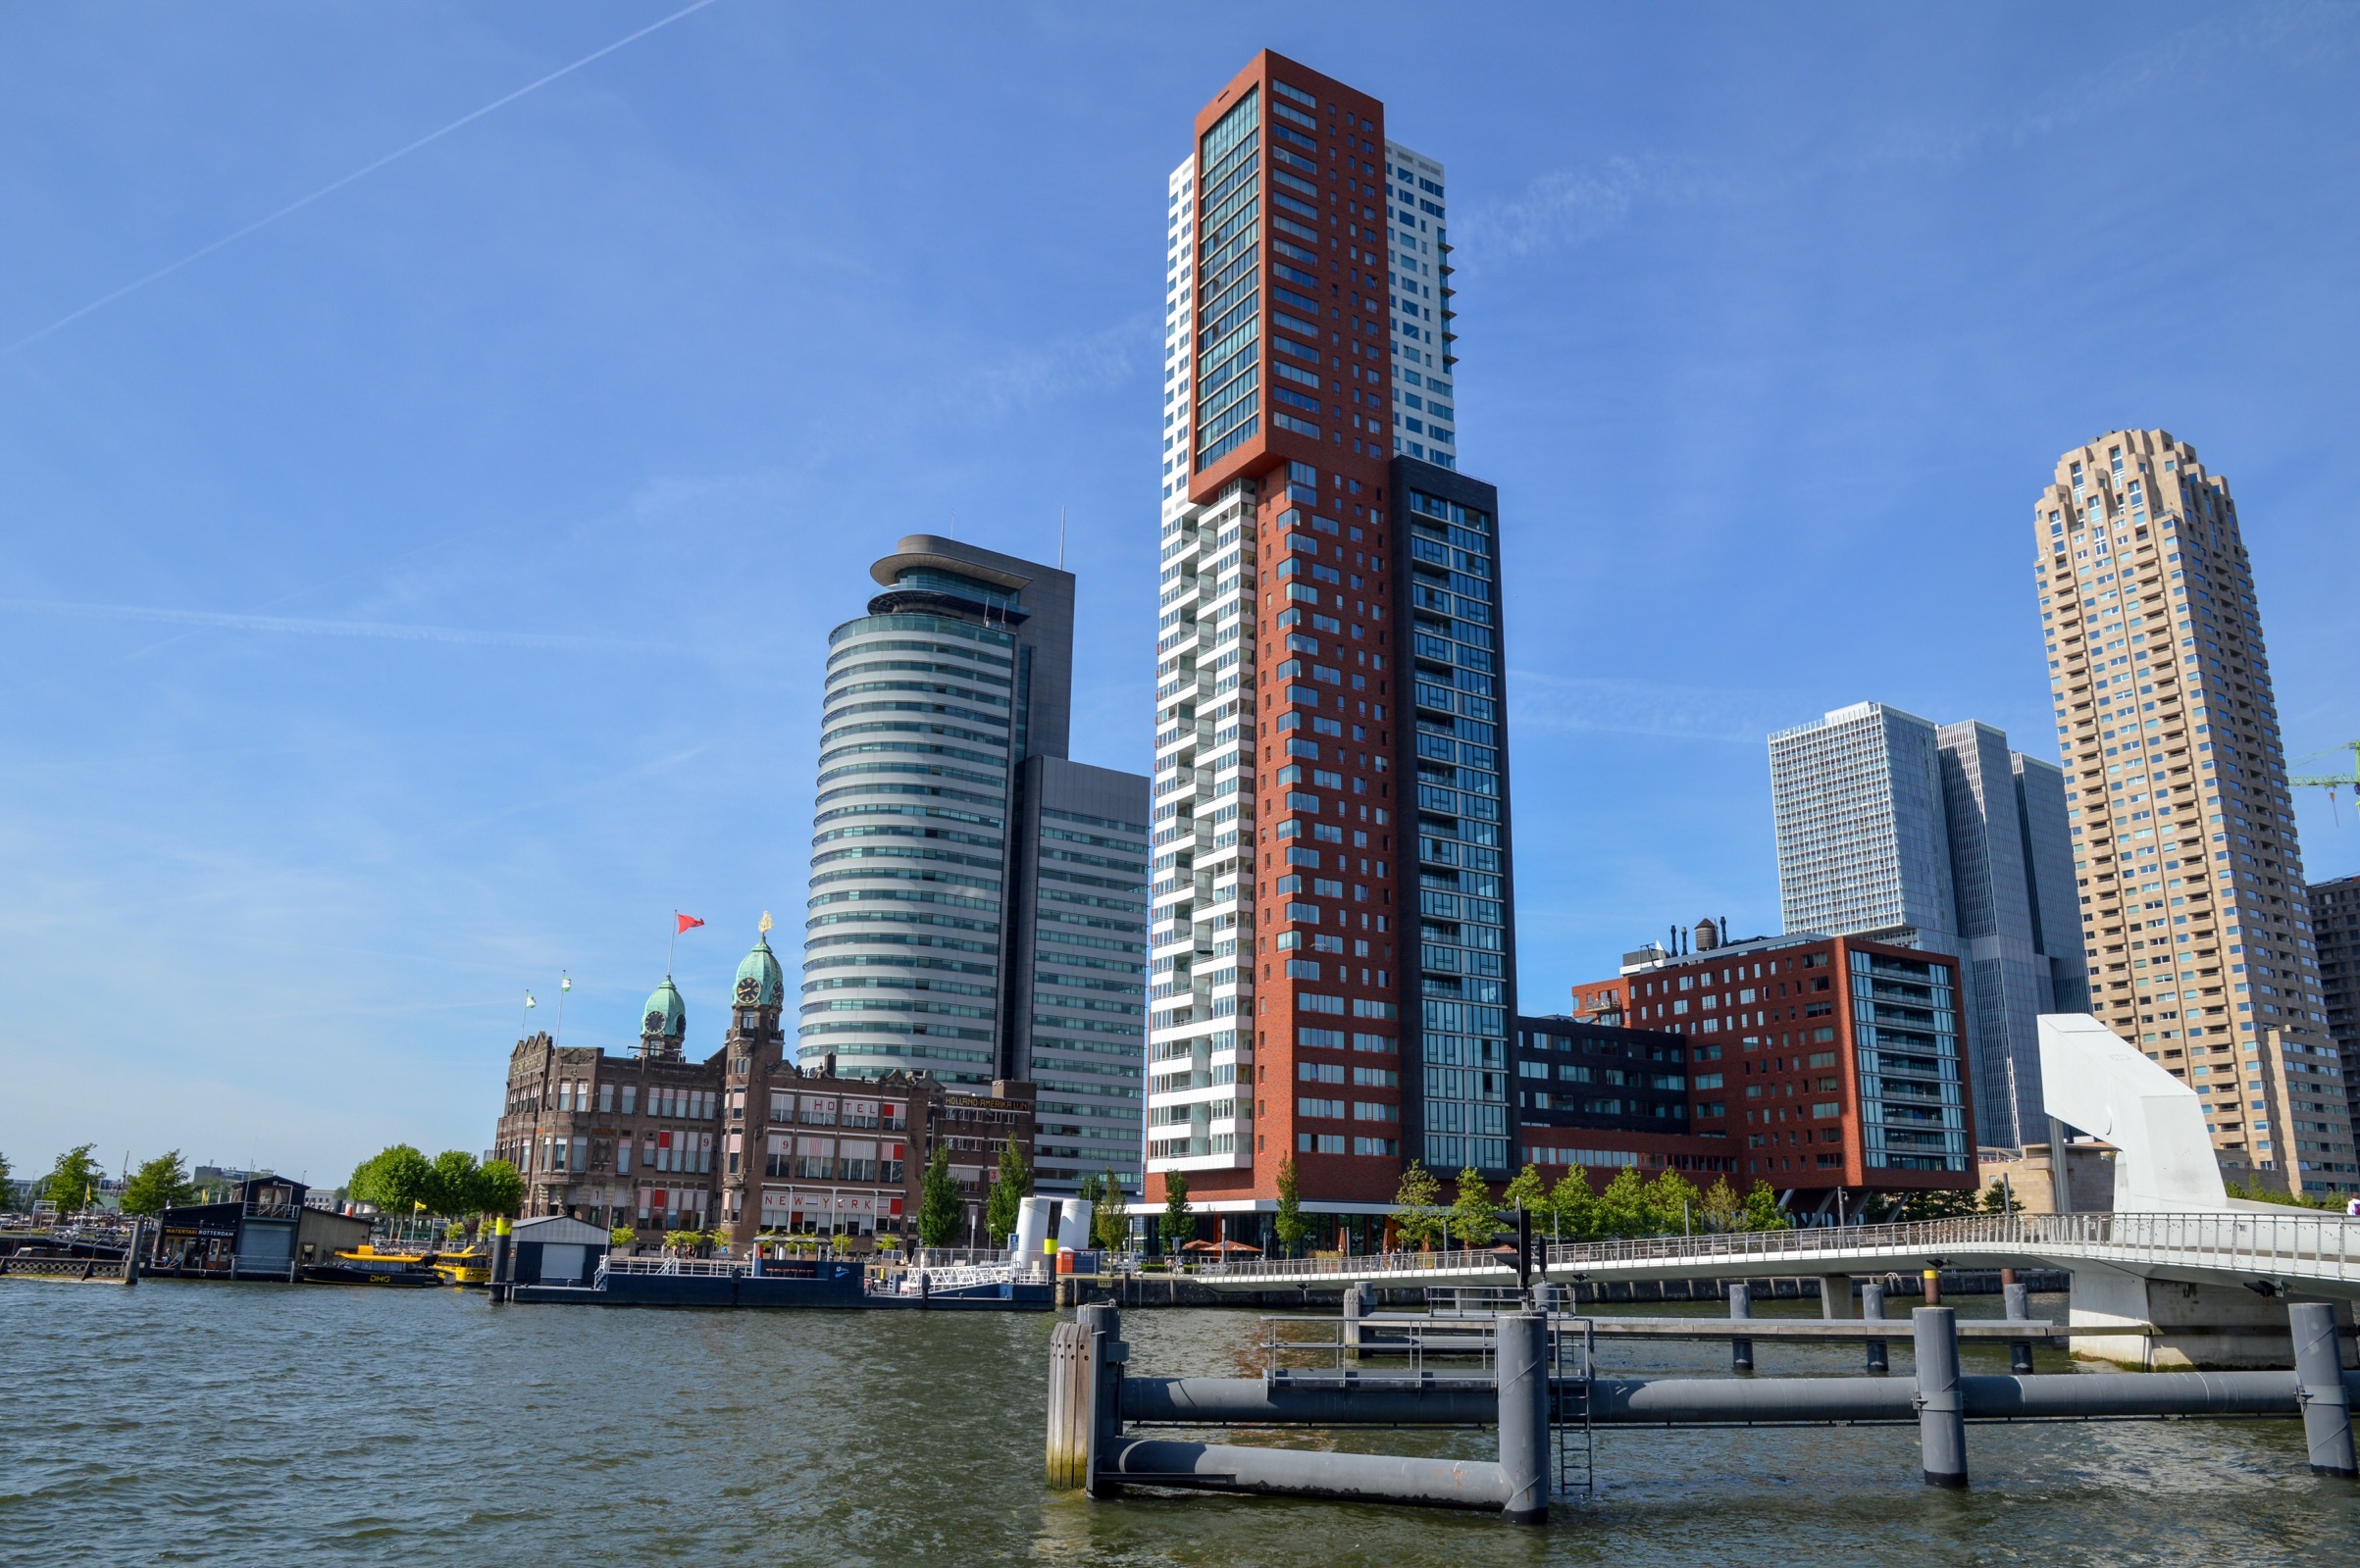 View of Hotel New York from Fenix Food Factory, Rotterdam, the Netherlands